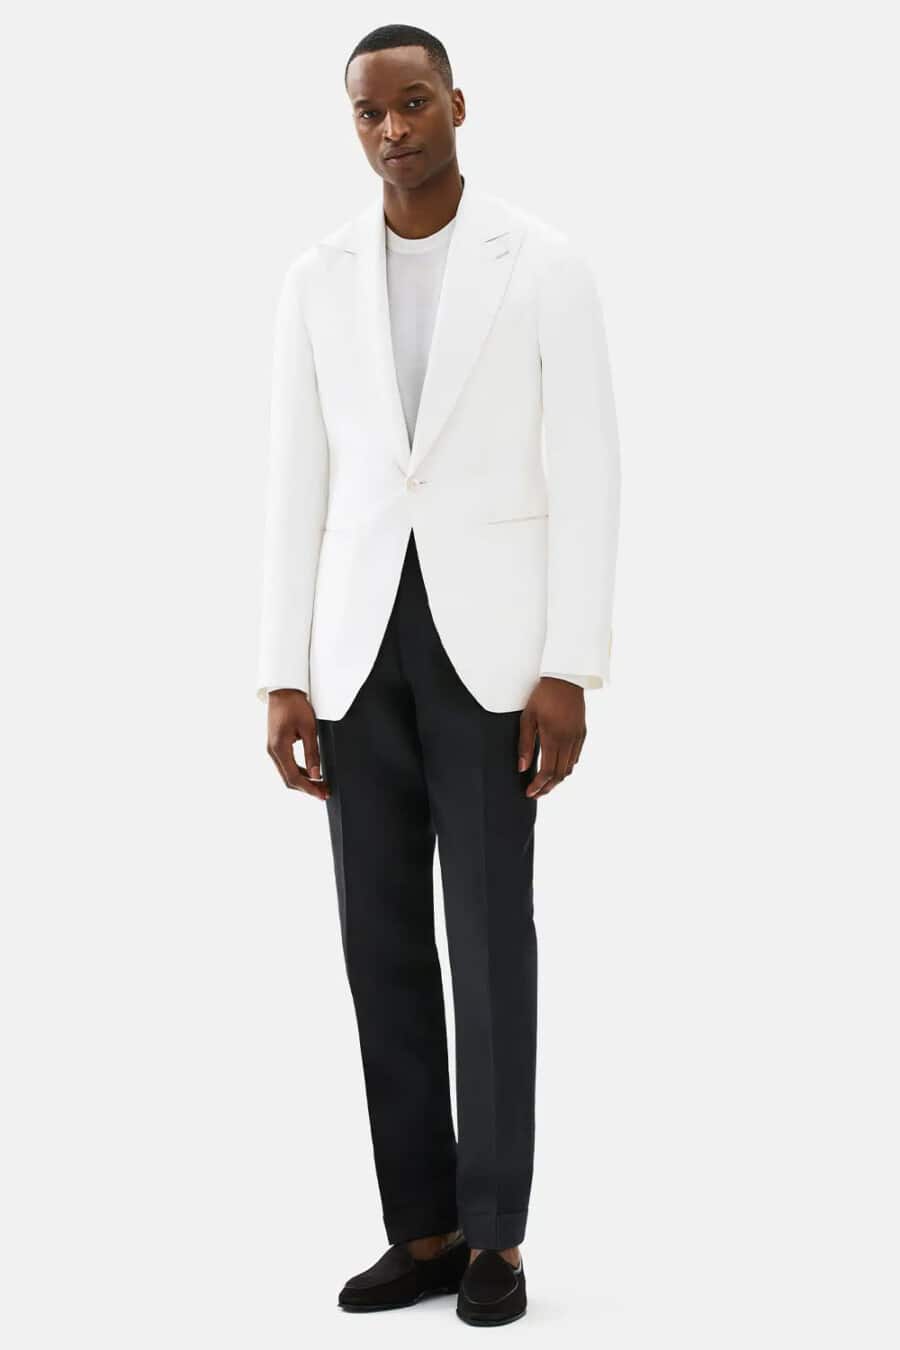 Men's black dress pants, white long-sleeve top, white tuxedo jacket and black suede slippers outfit